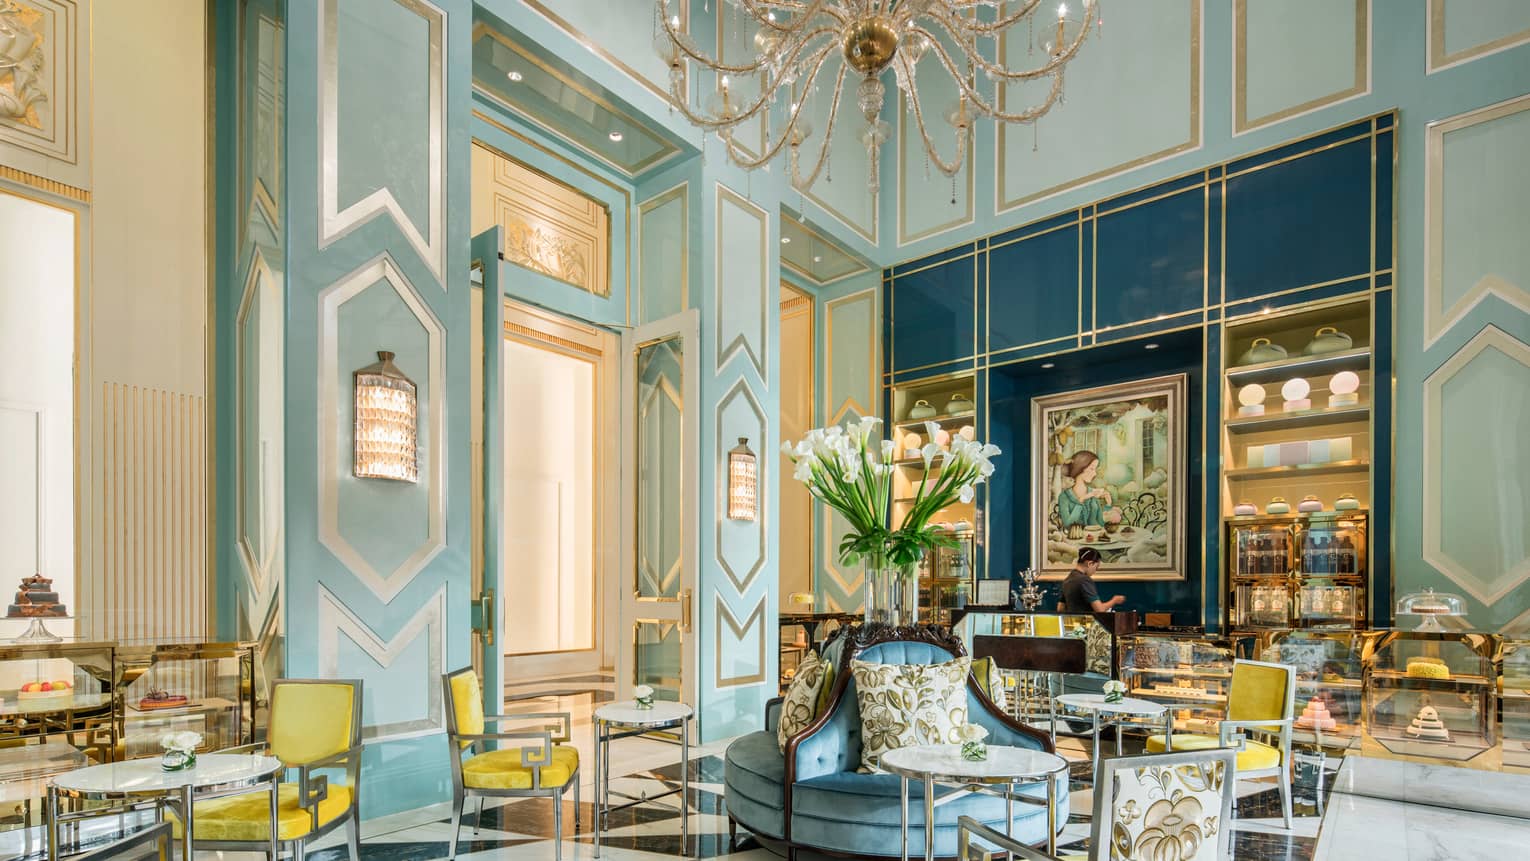 Bright La Patisserie cafe with elegant blue decor, yellow chair, high ceilings, crystal chandelier